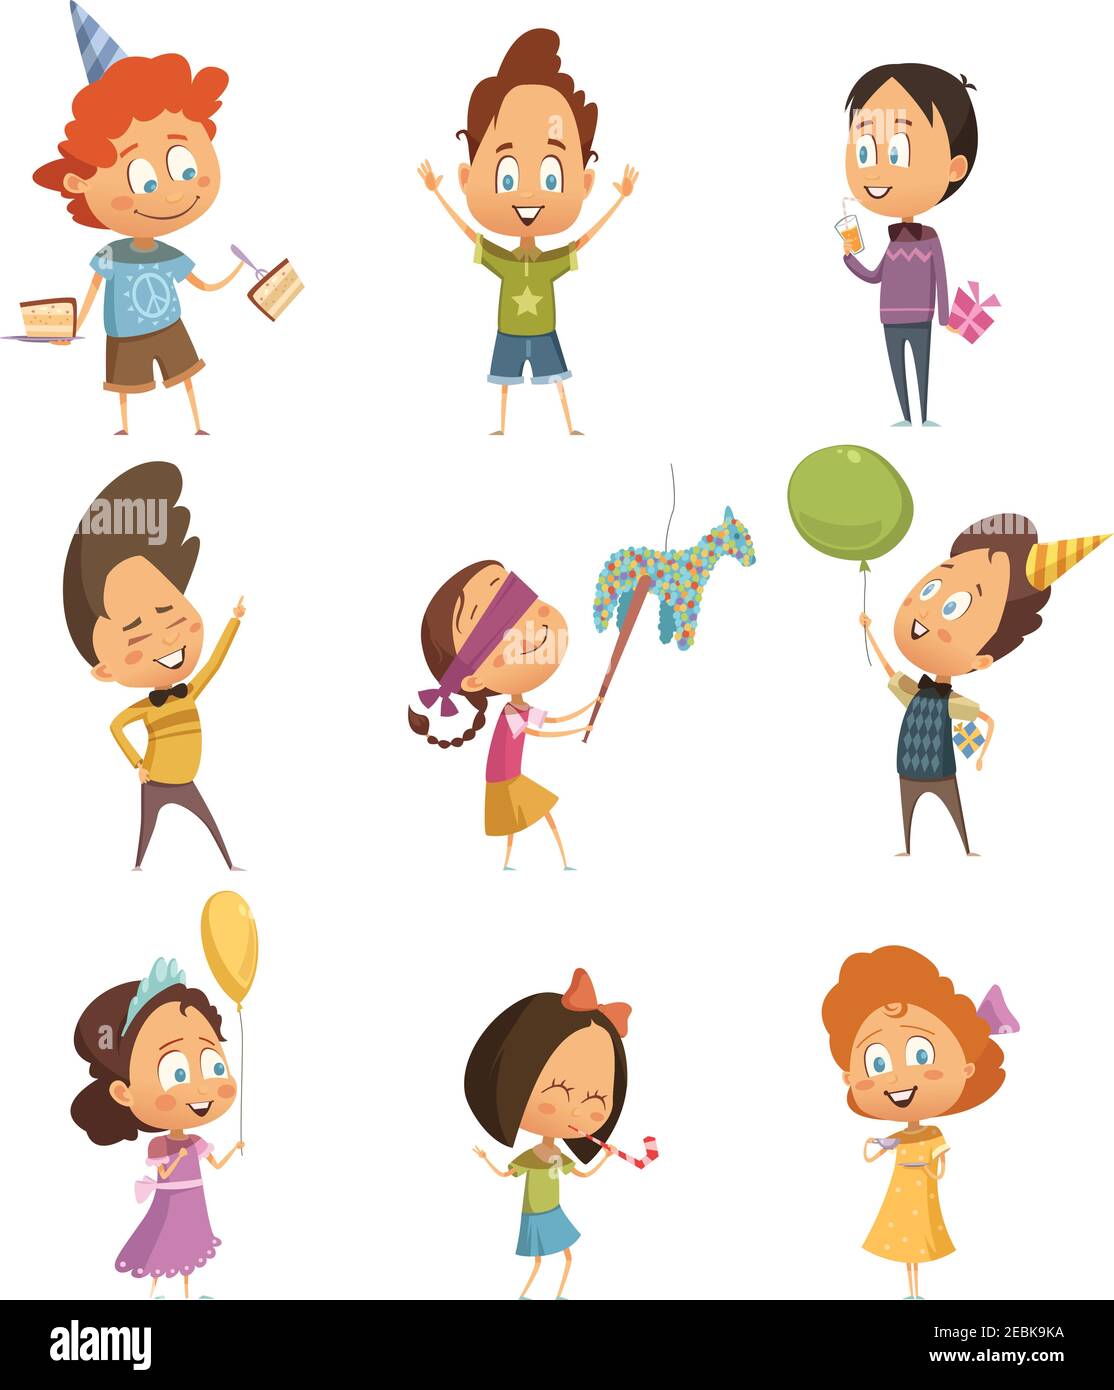 Cartoon retro icons set of kids dancing and having fun at birthday party isolated on white background vector illustration Stock Vector